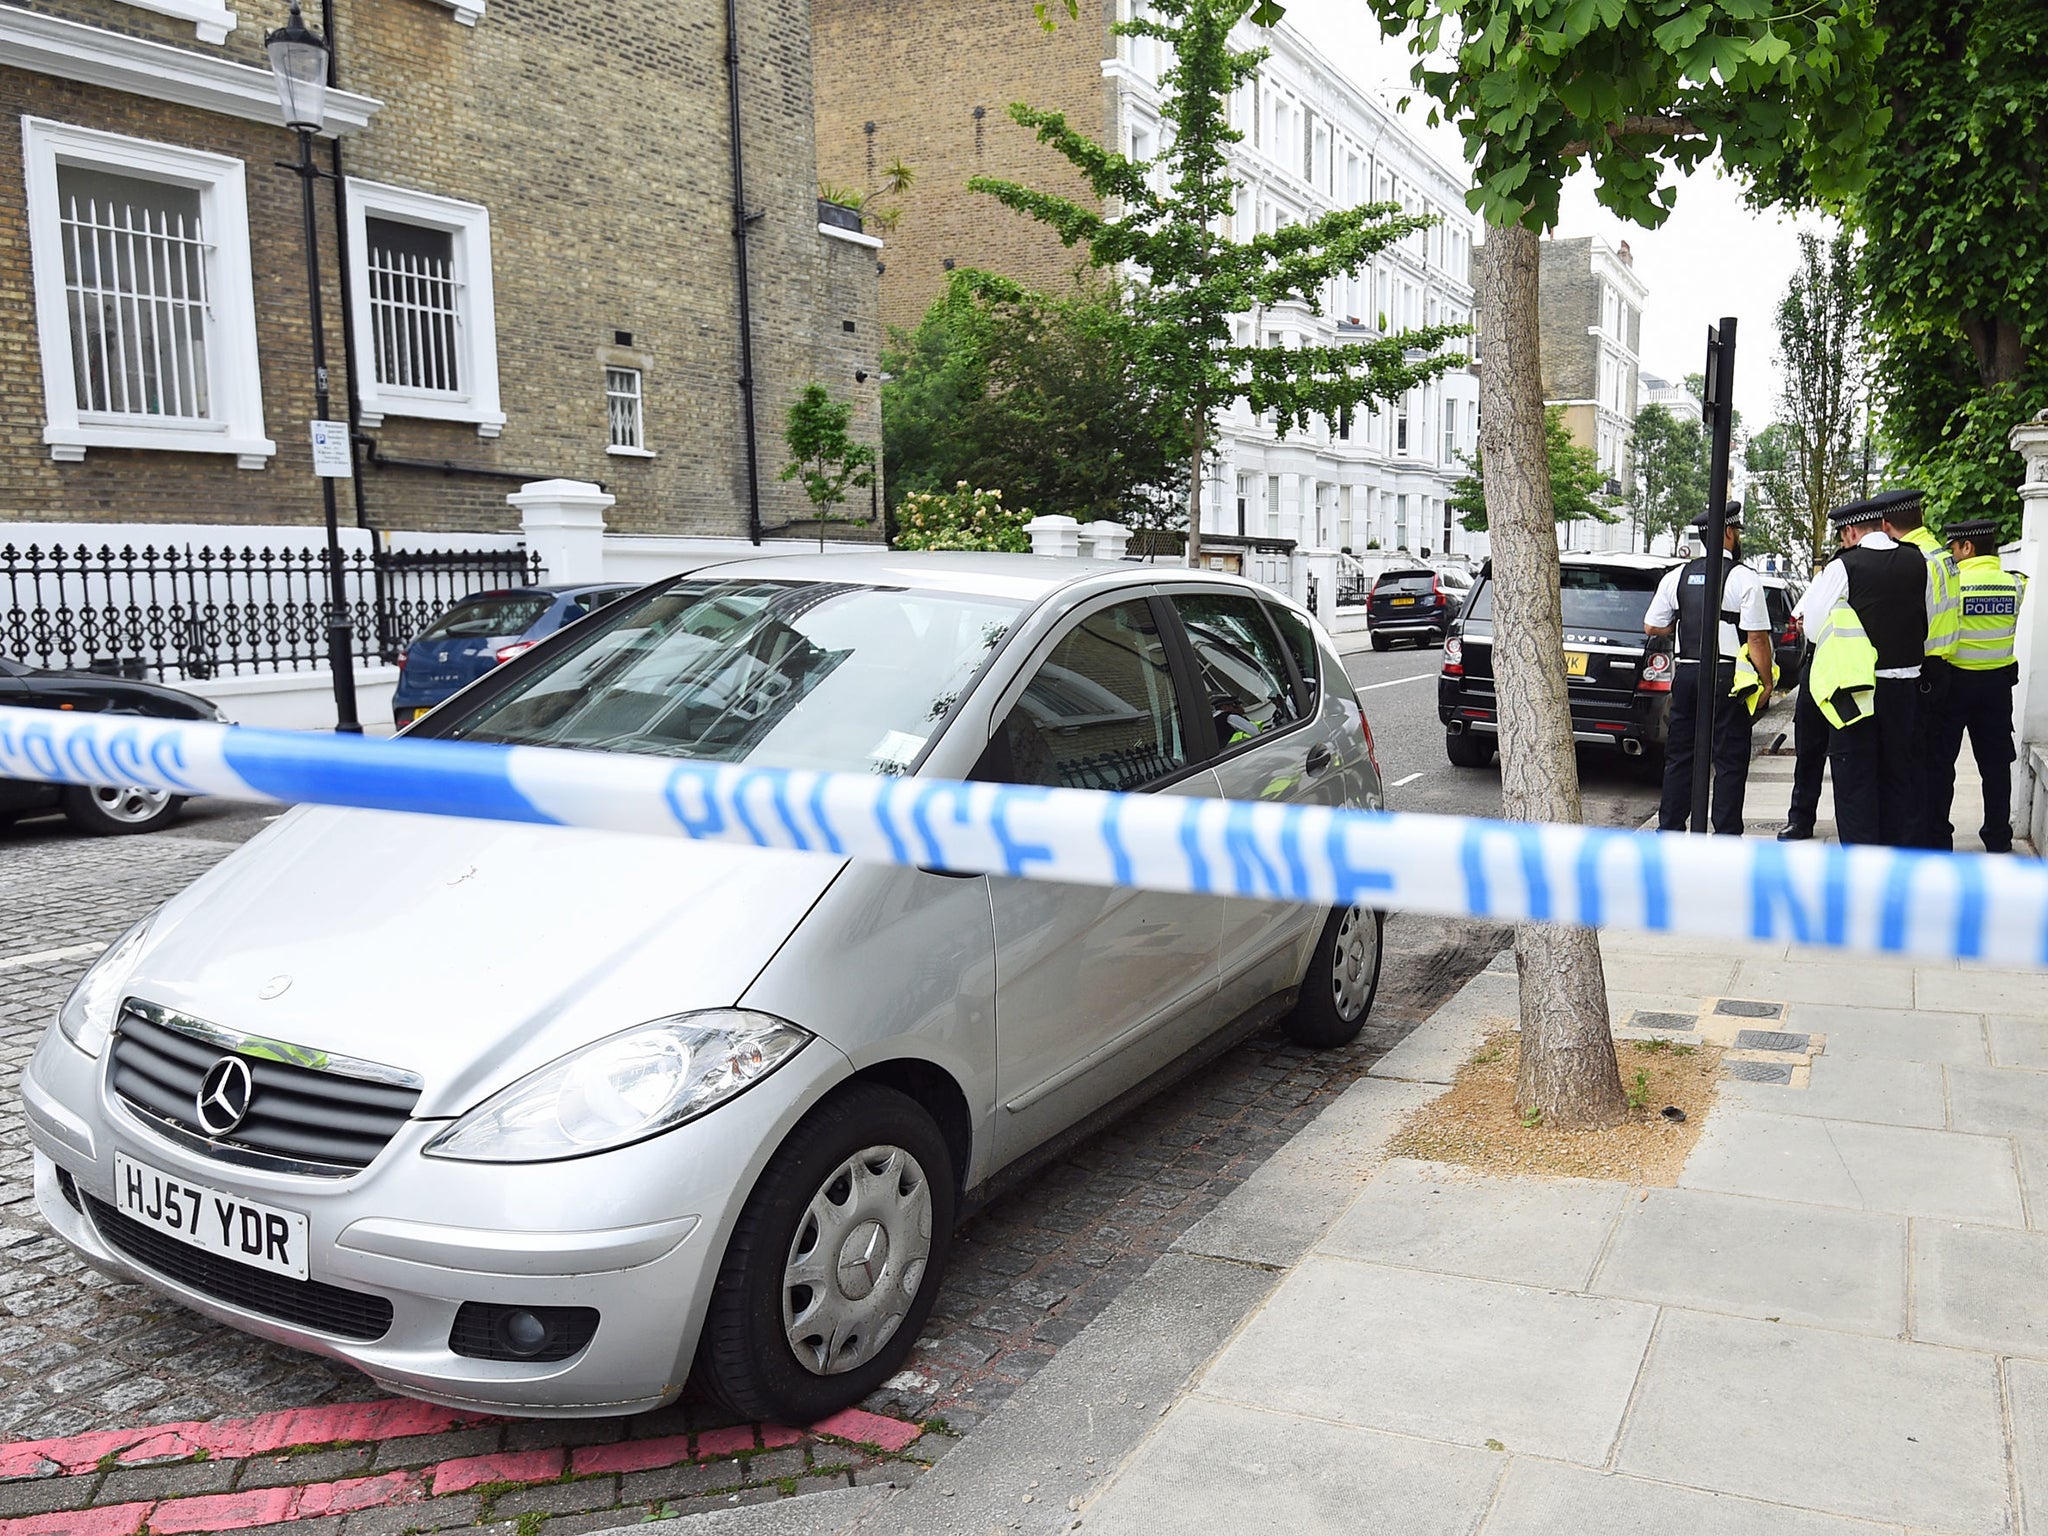 Police officers at the murder scene in Kensington, west London, where a man was stabbed to death.